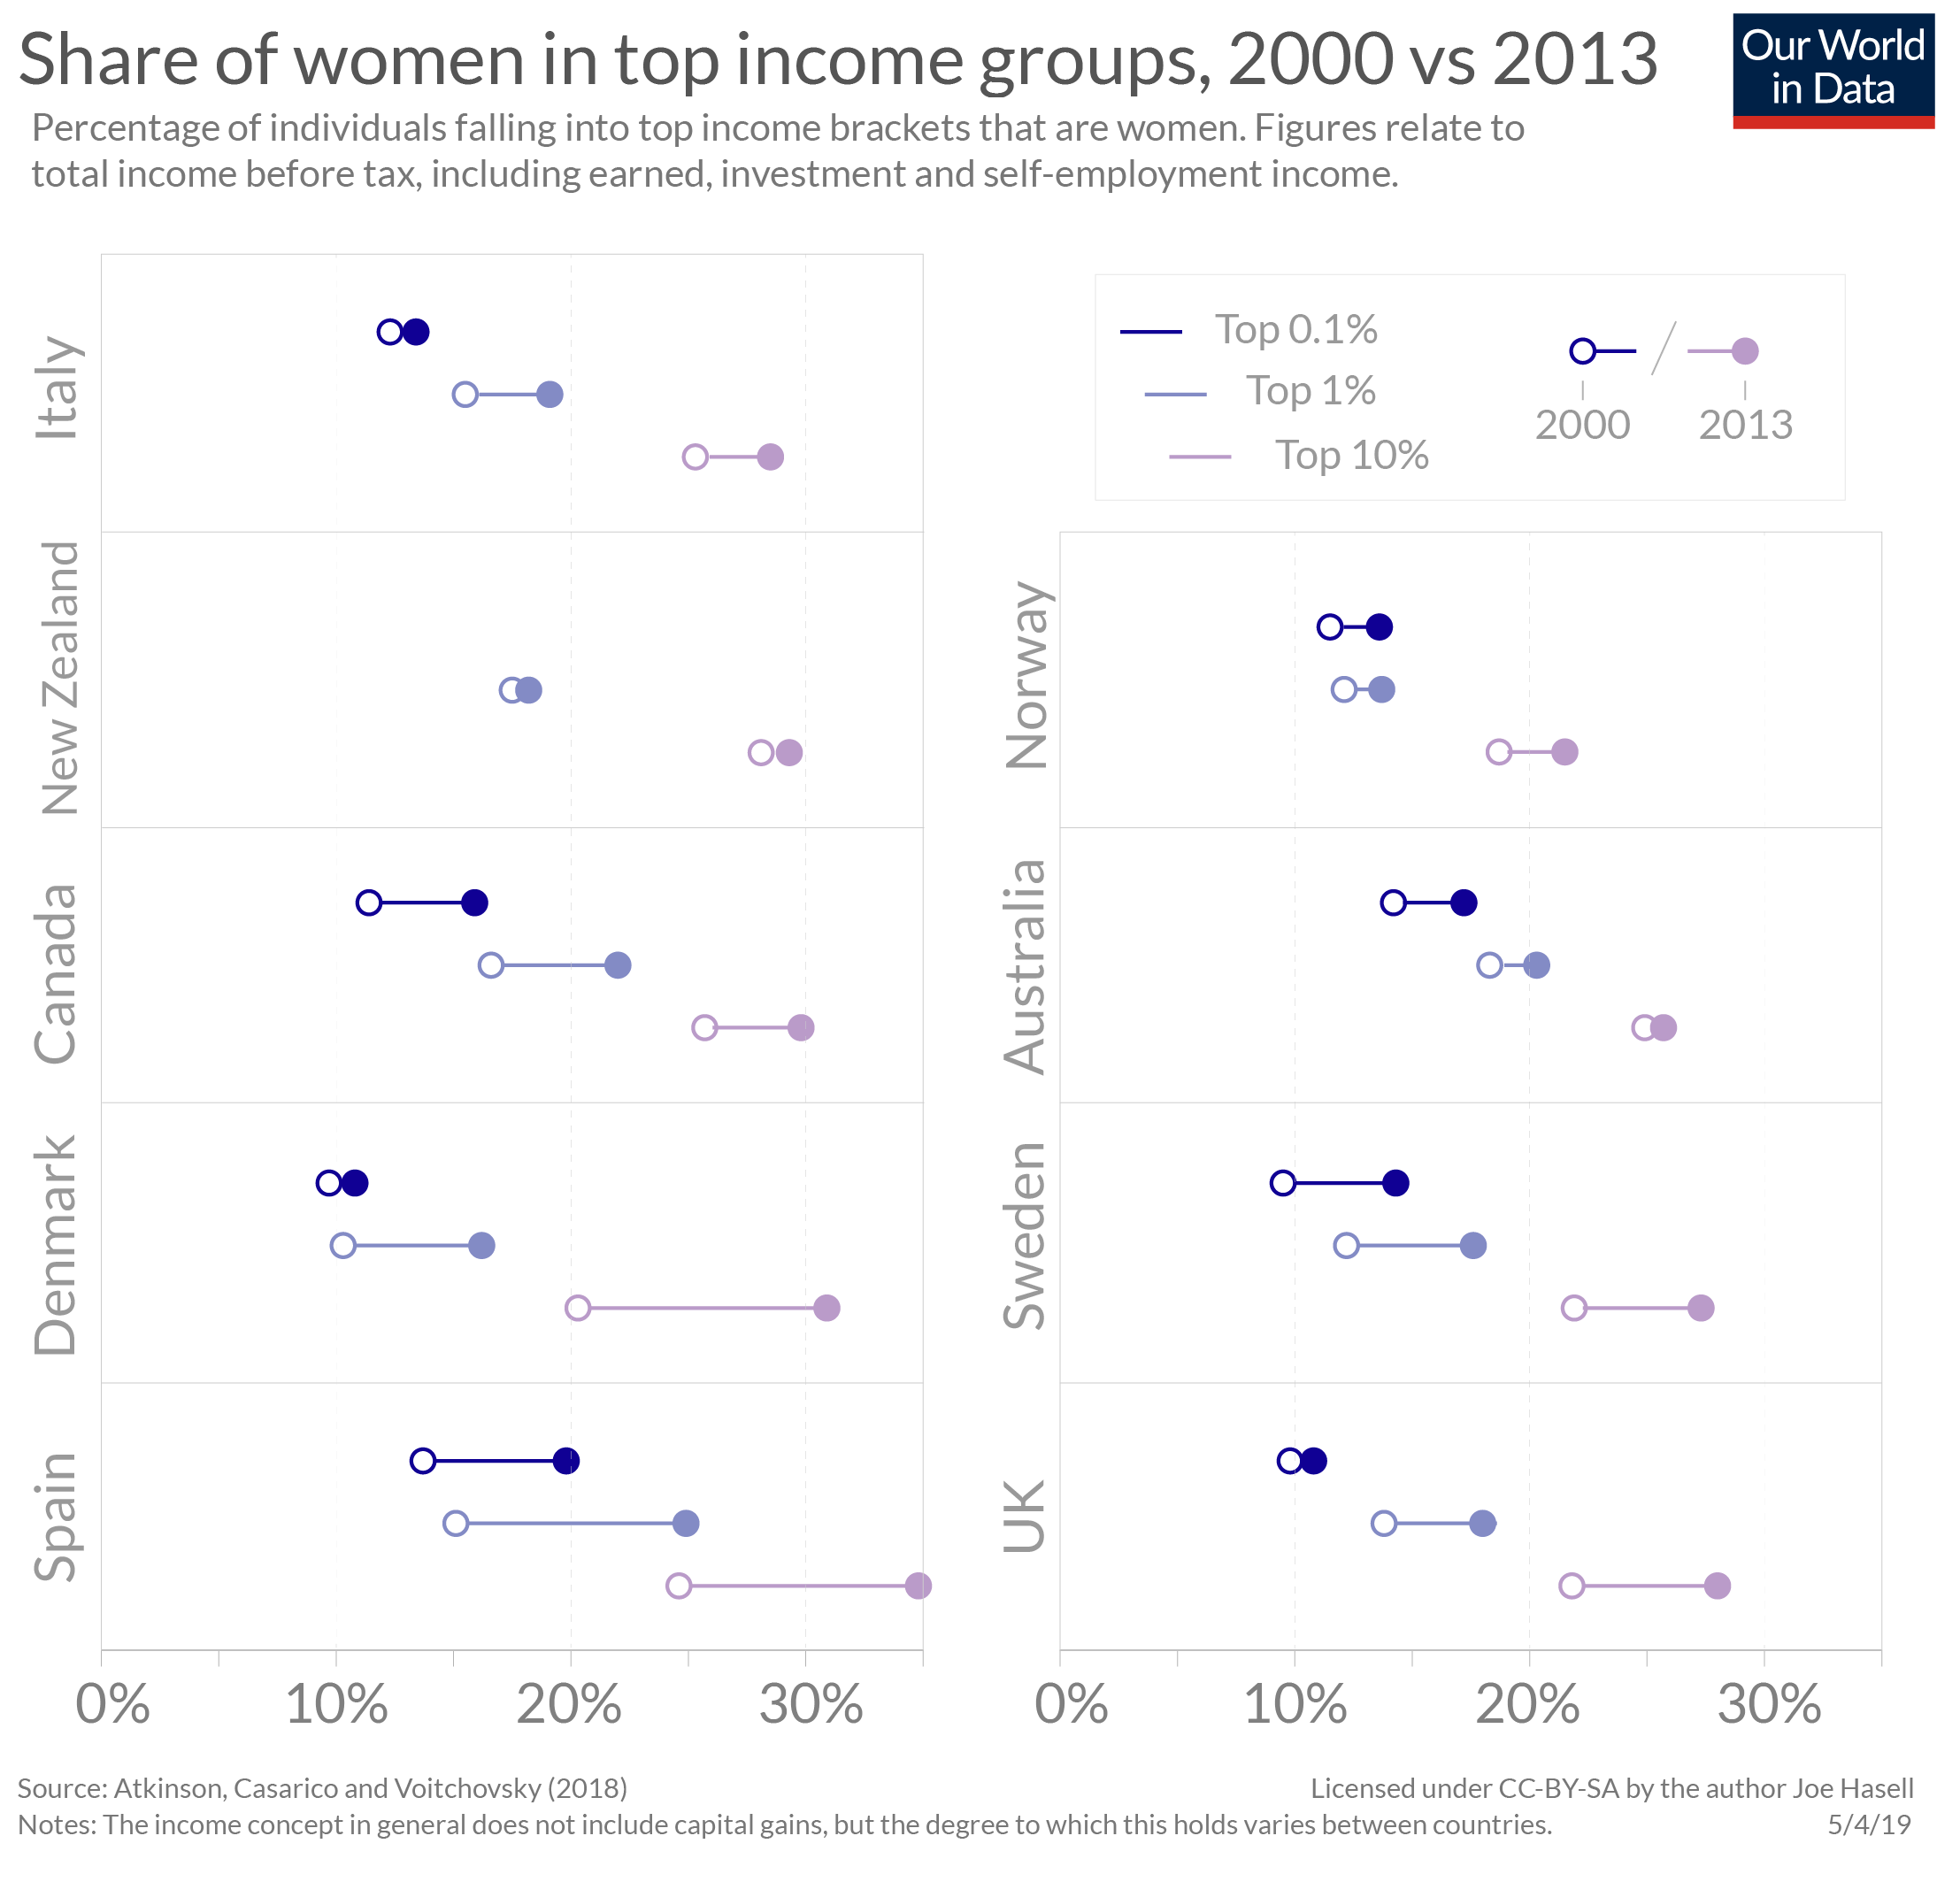 Plot of the shares of women in the top 10%, 1%, and 0.1%  income groups in selected high-income countries between 2000 and 2013. The shares have increased in most countries, but women remain very underrepresented.